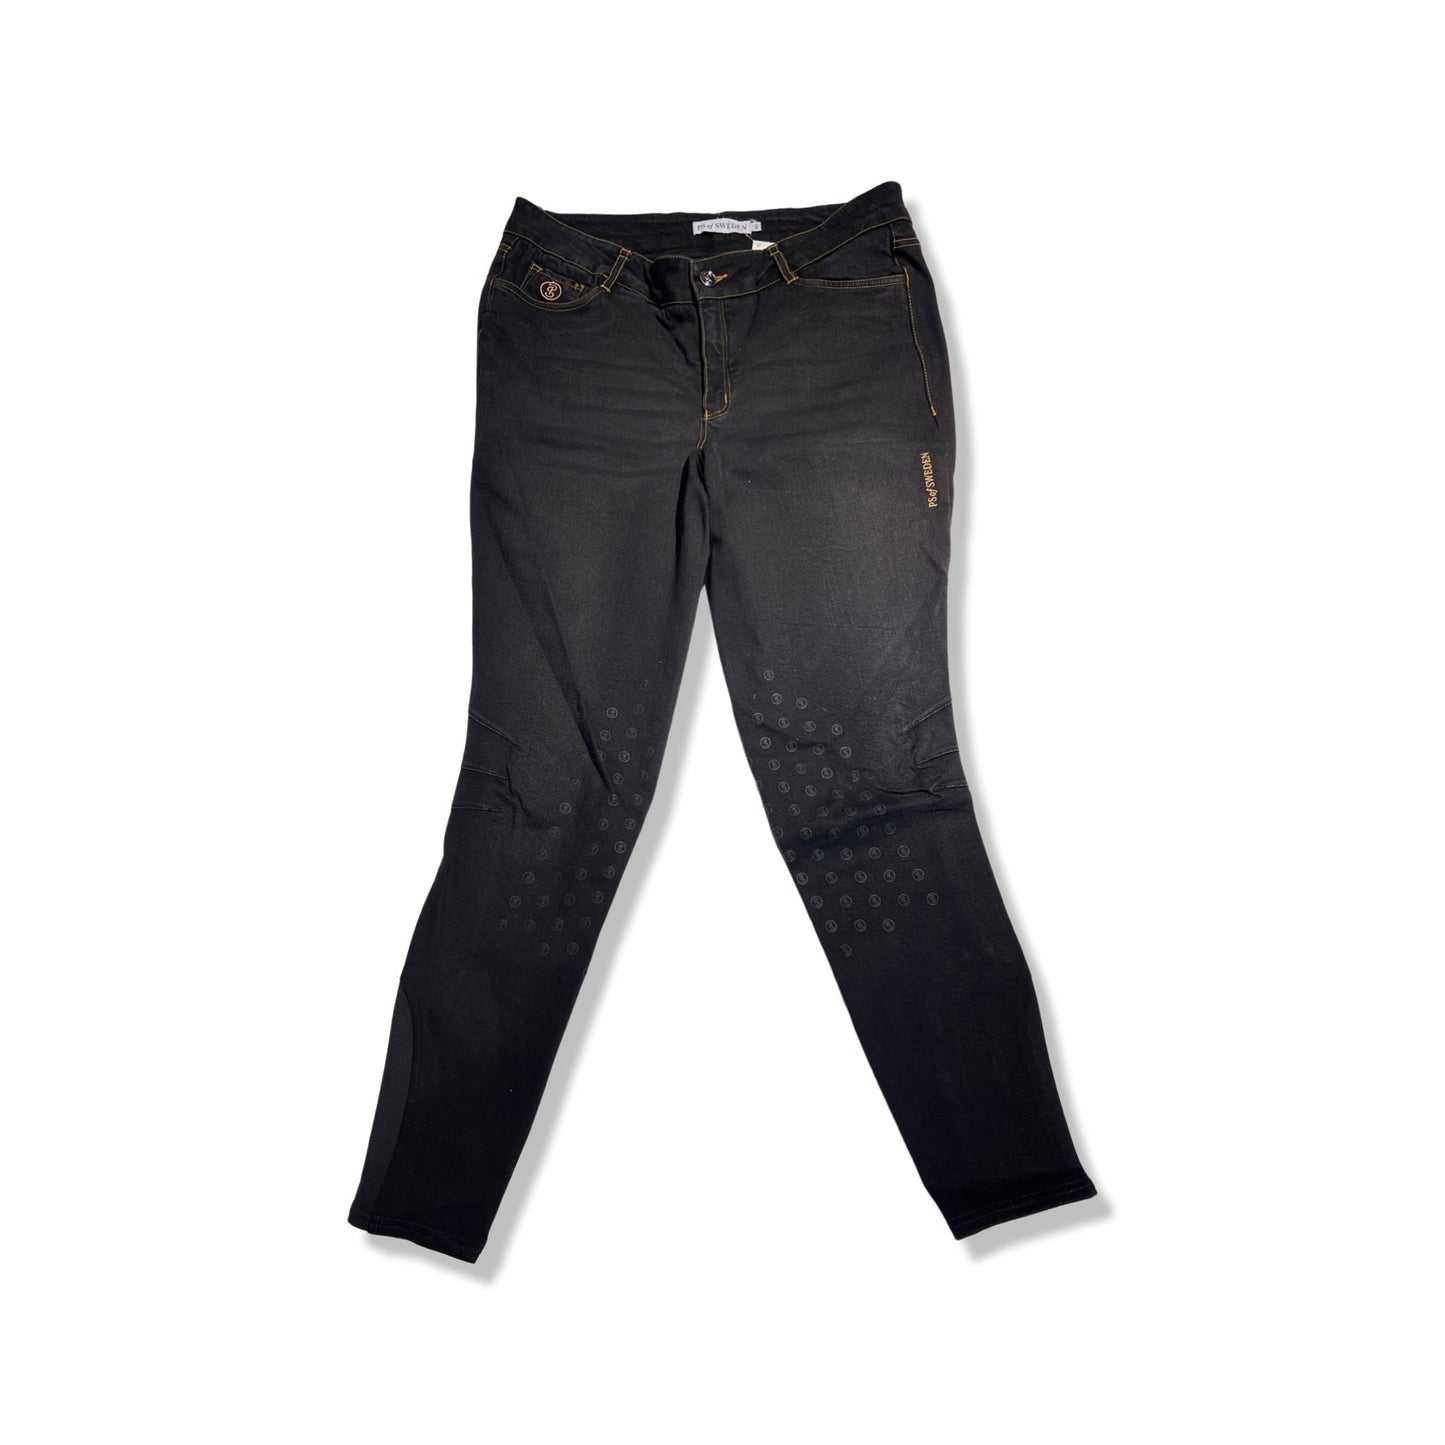 PS of Sweden Maggie Riding Breeches Ladies 34